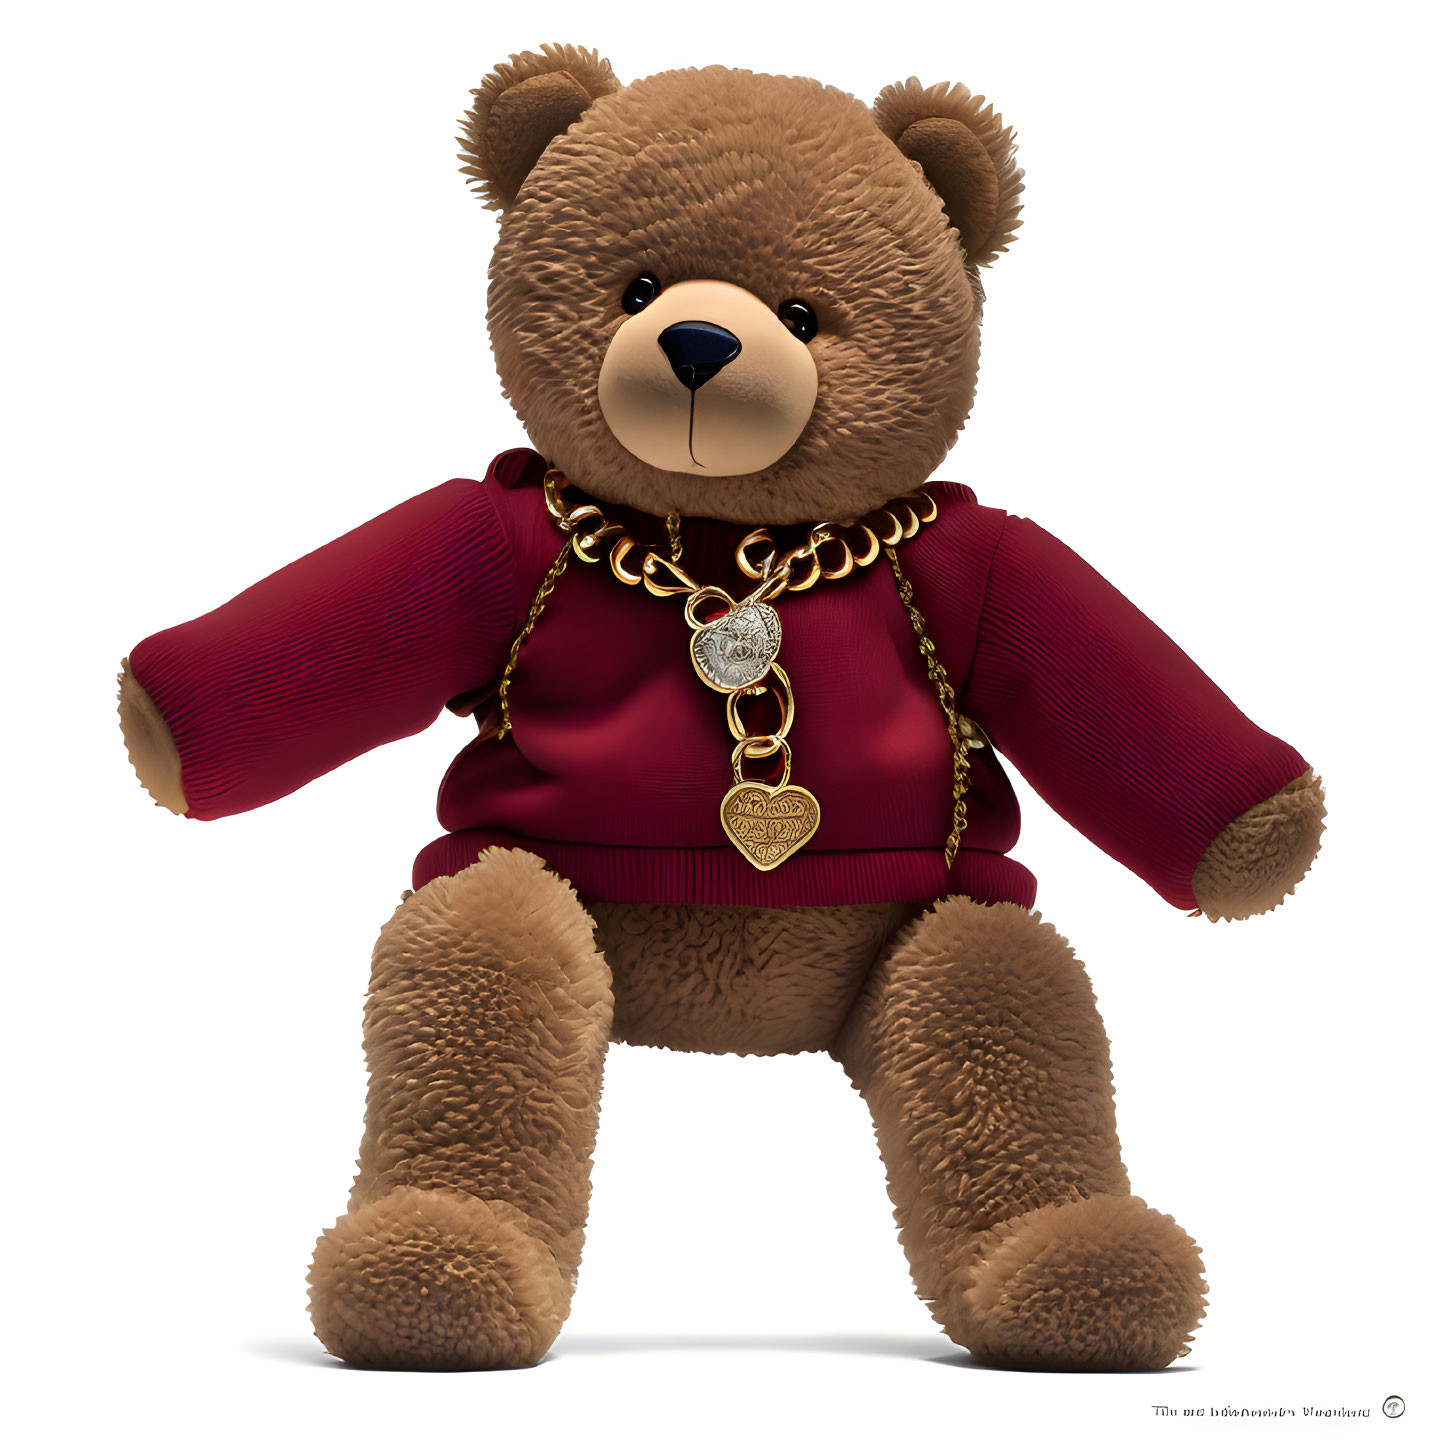 Plush teddy bear in red sweater with gold heart necklace